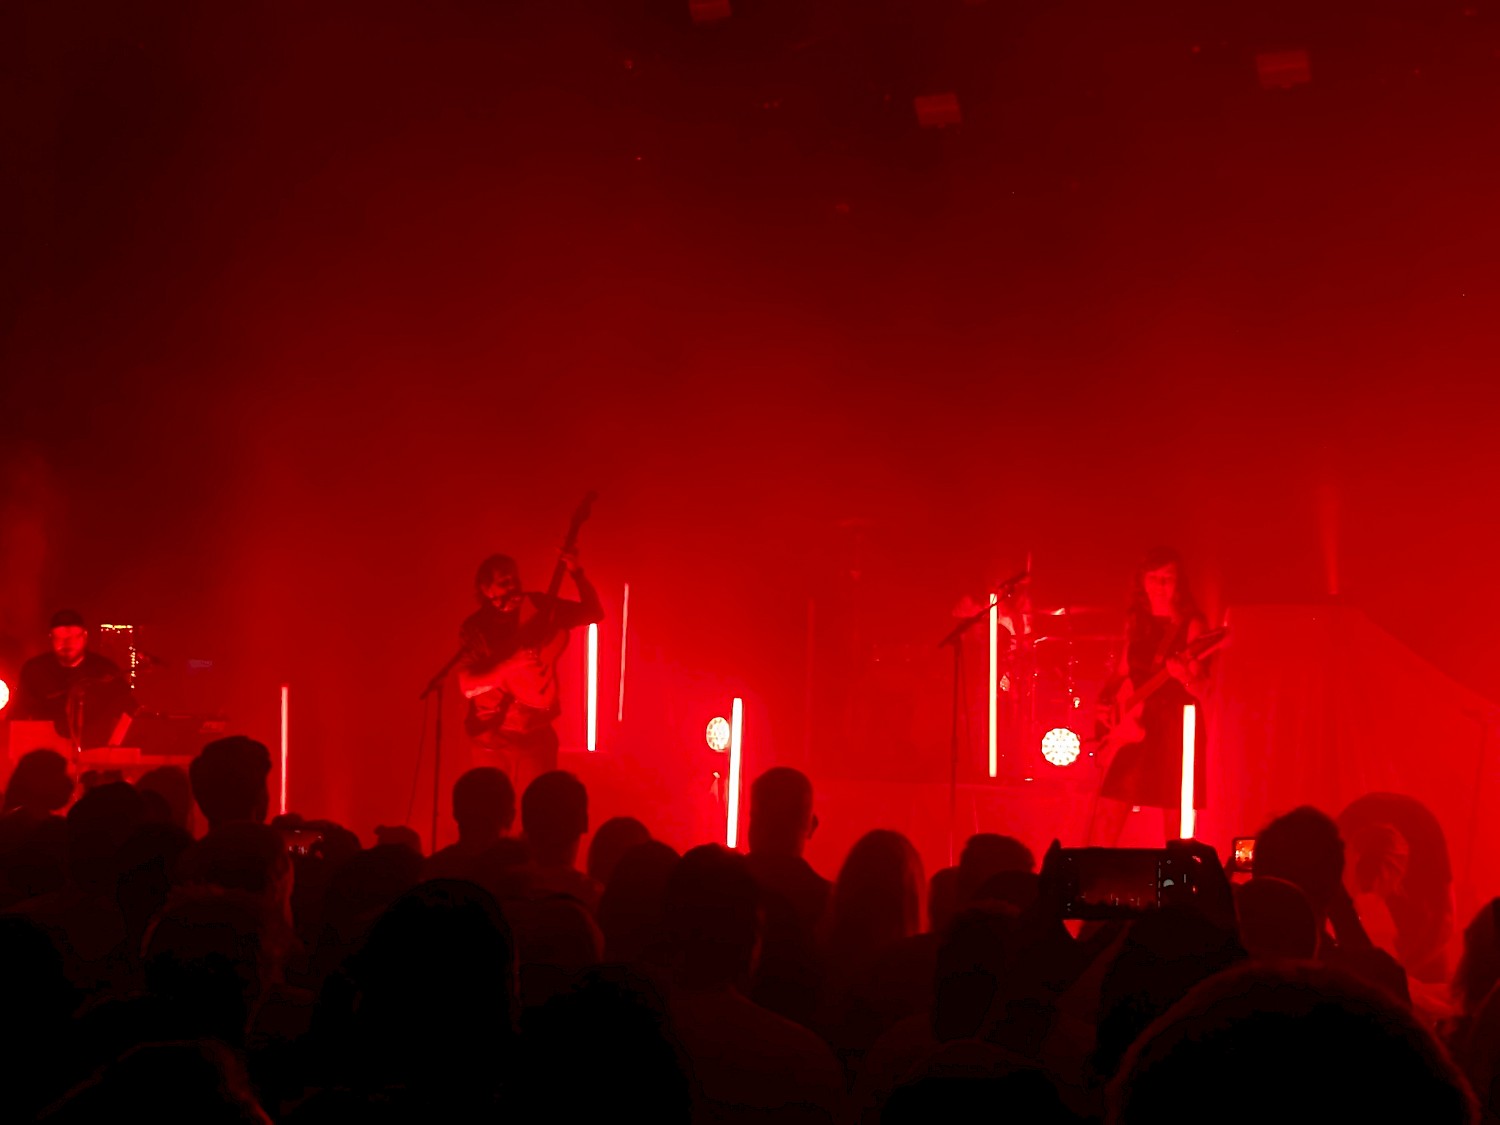 Silversun Pickups on stage with red lighting